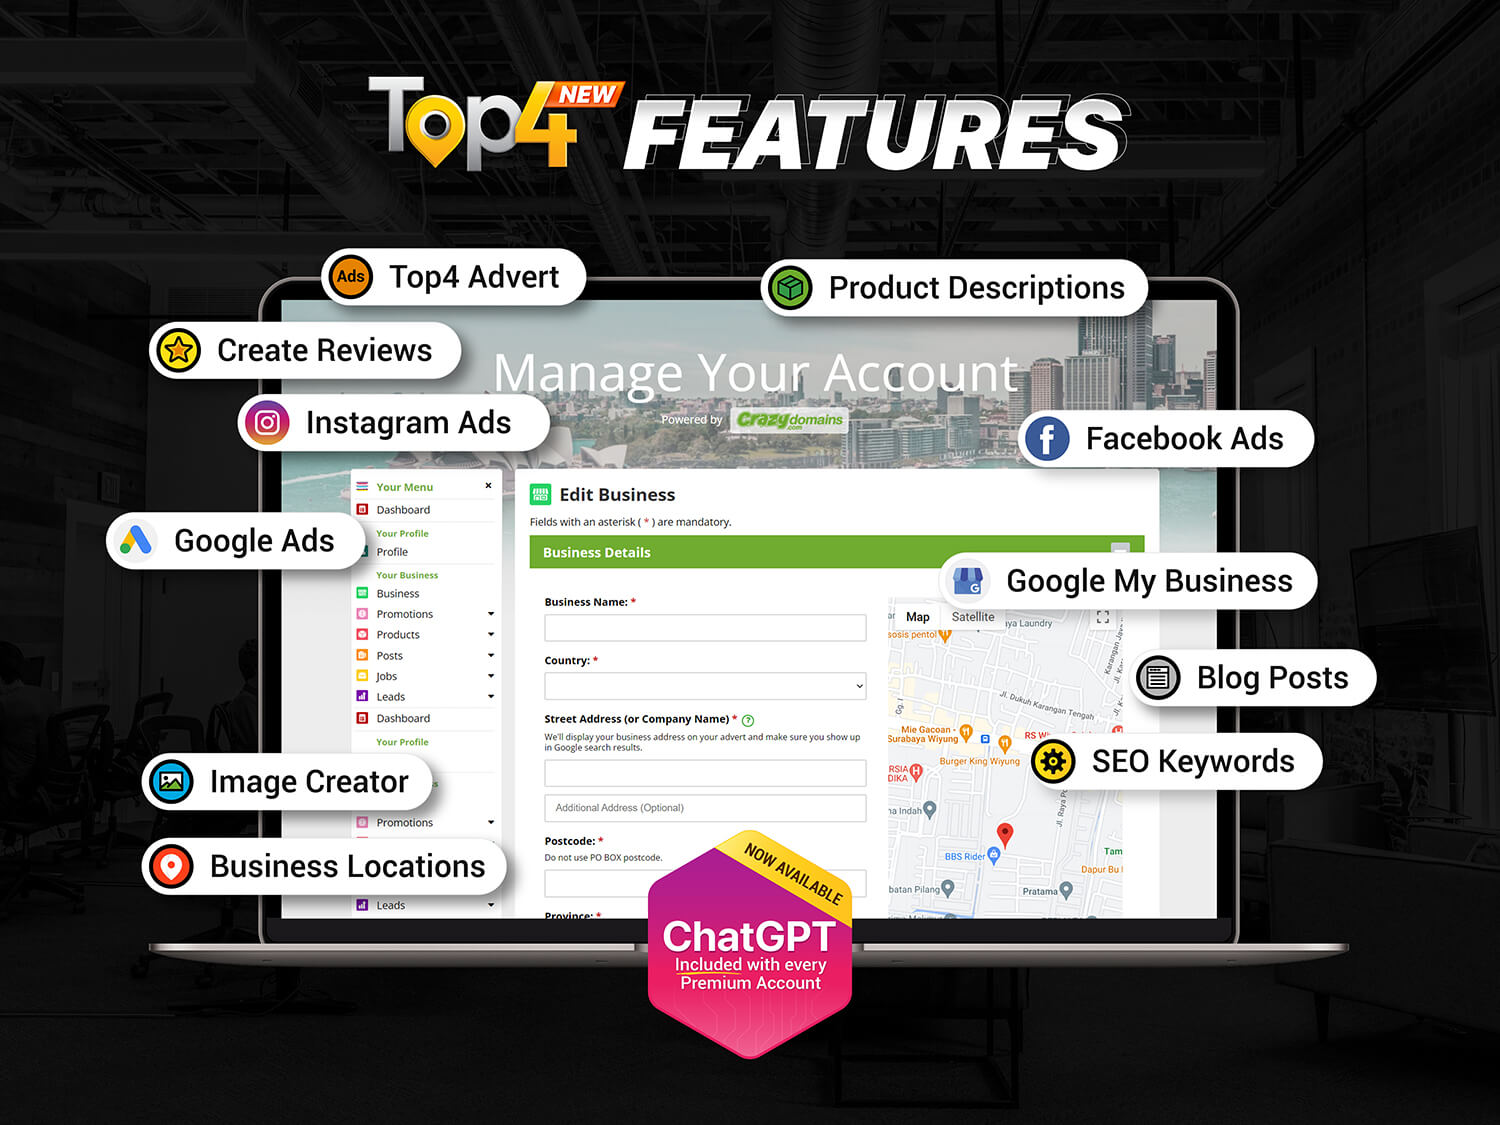 Top4 Introduces AI-Powered Local Page Creation and Location-Based Marketing Platform for Businesses and Franchises